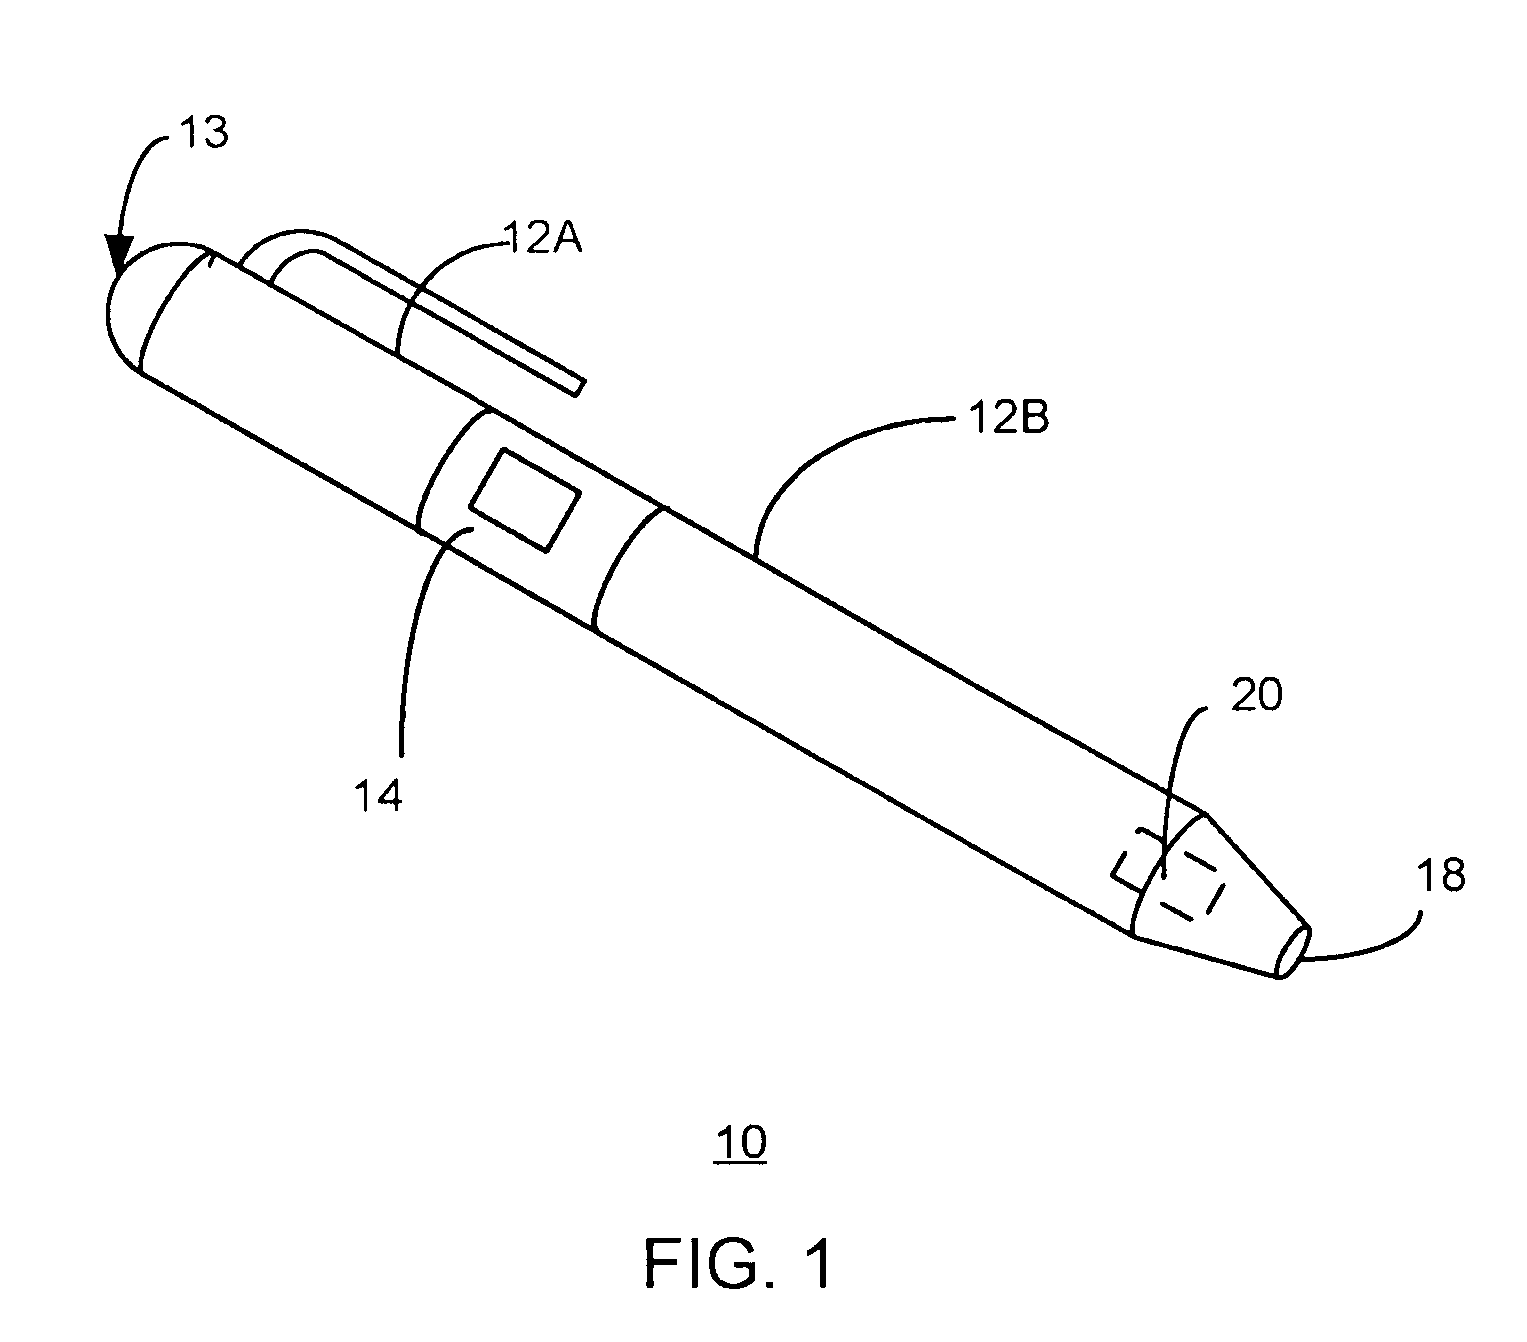 Electronic pens with dynamic features